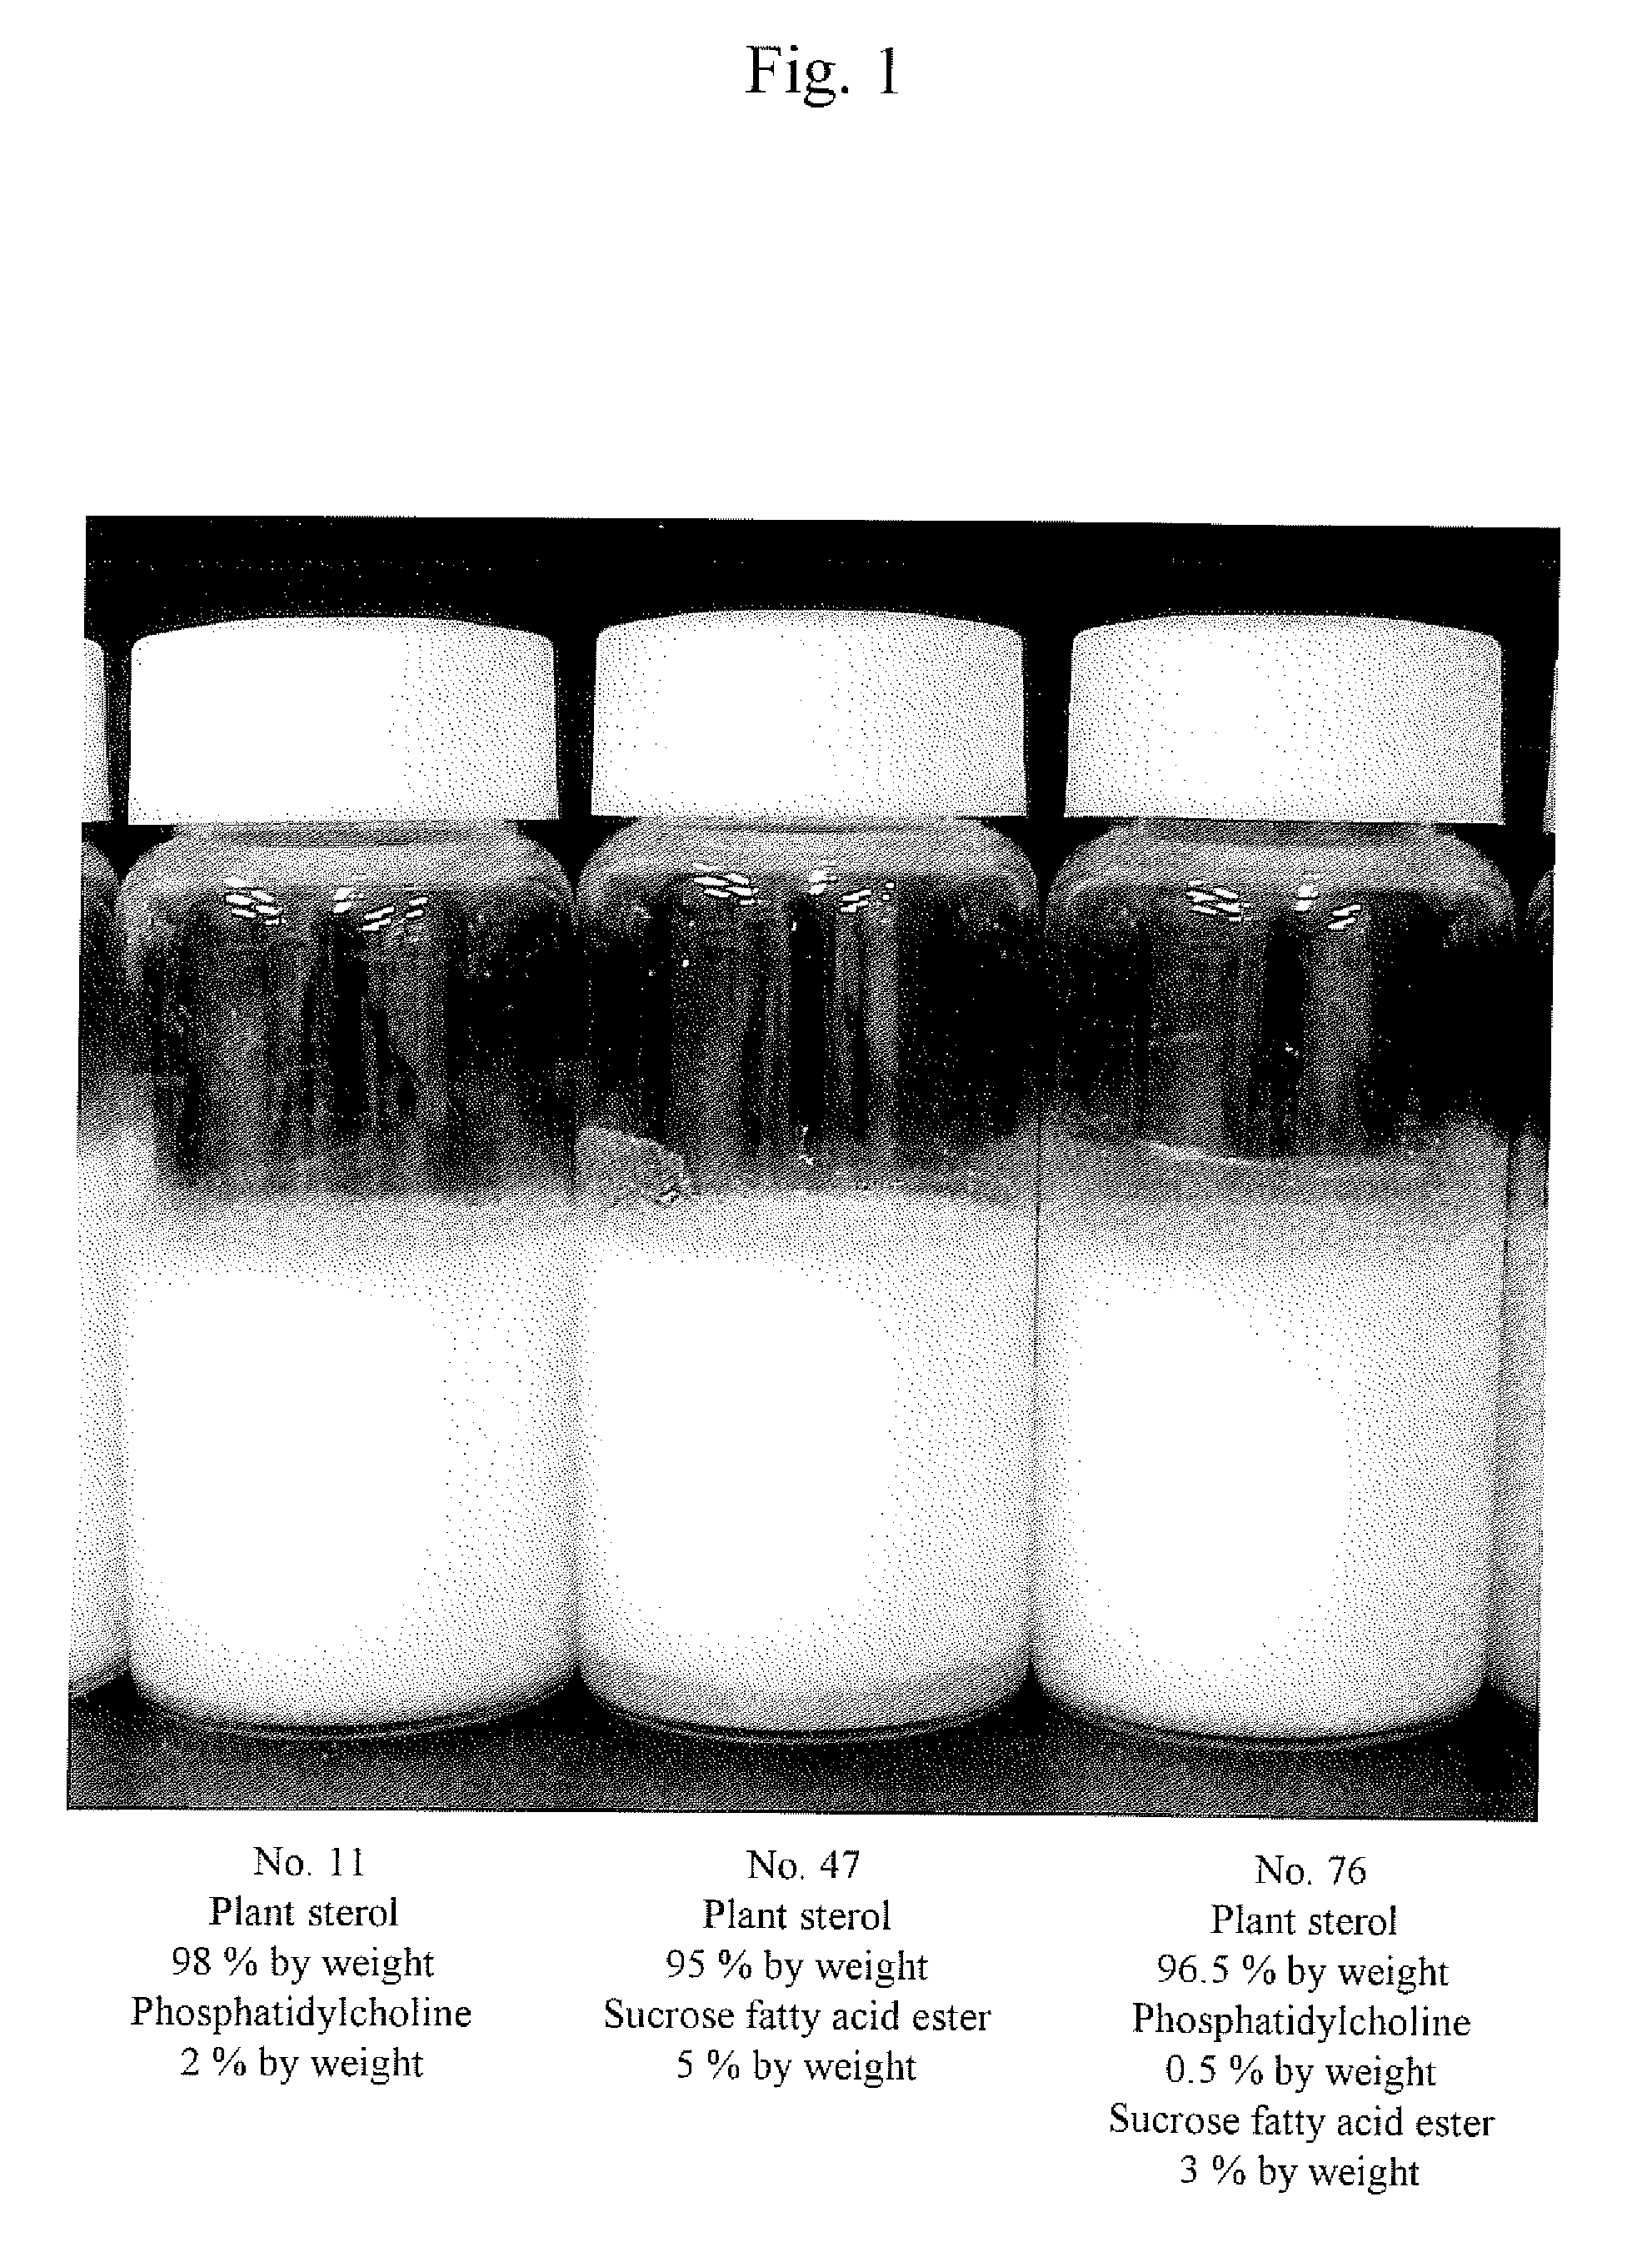 Composition of plant sterol and phosphatidylcholine and method for producing the same